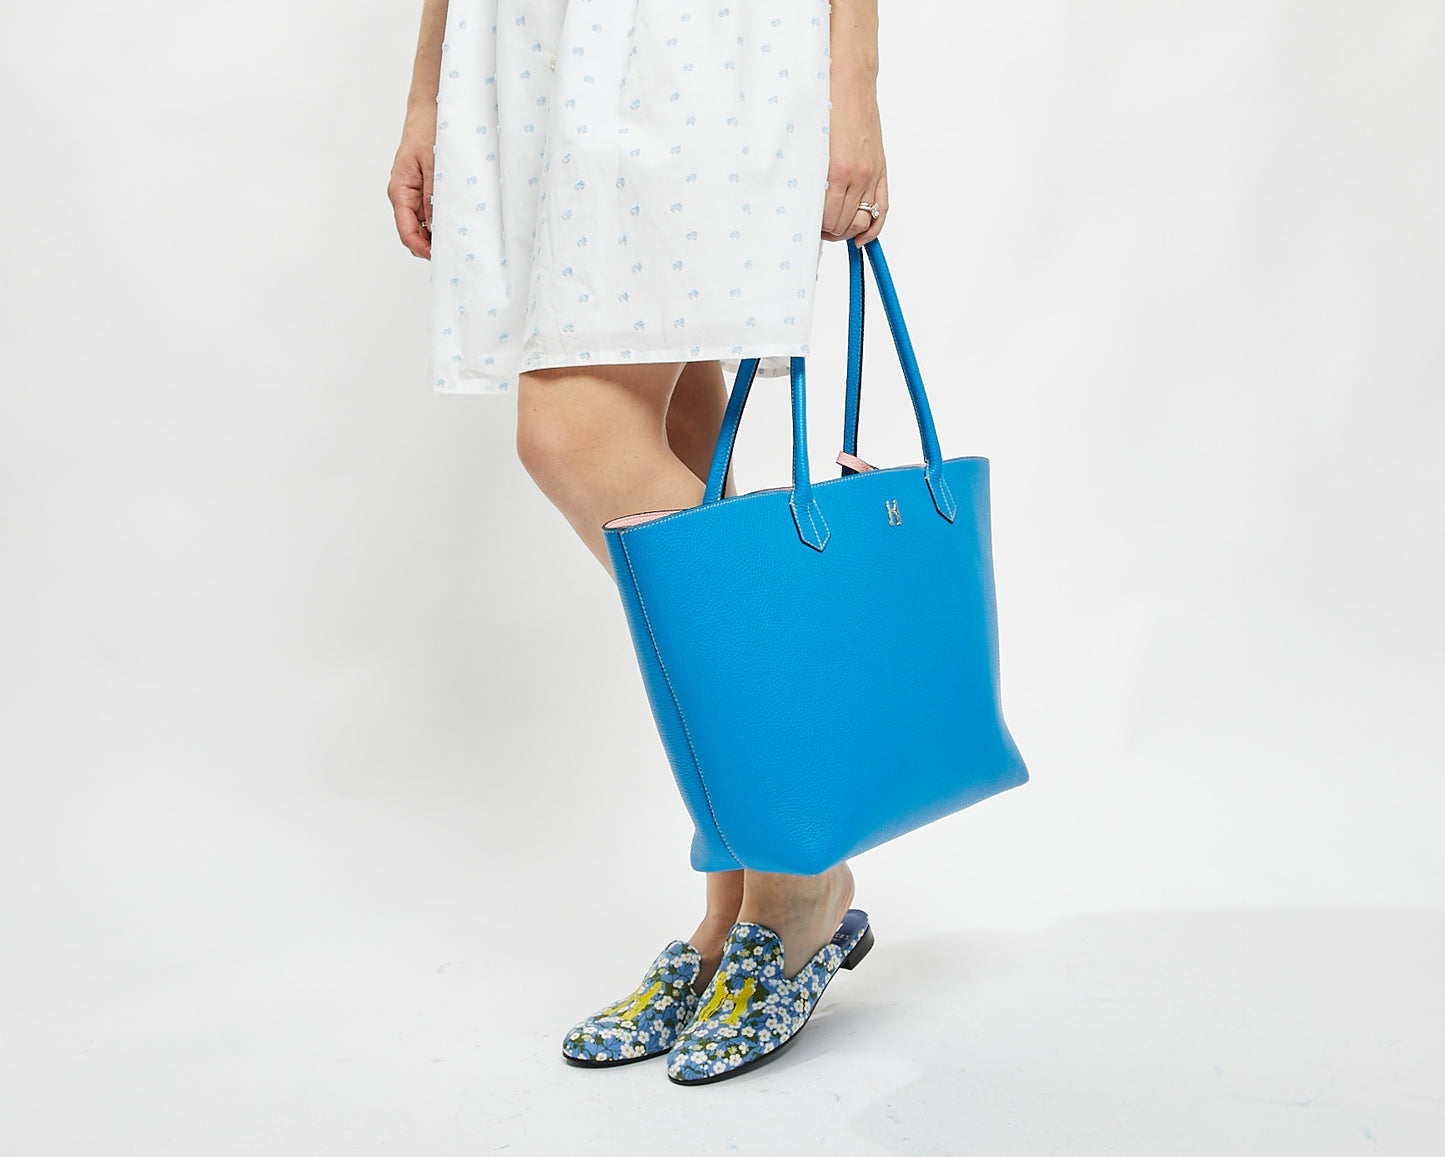 Gable Tote in Turquoise Leather with Pink